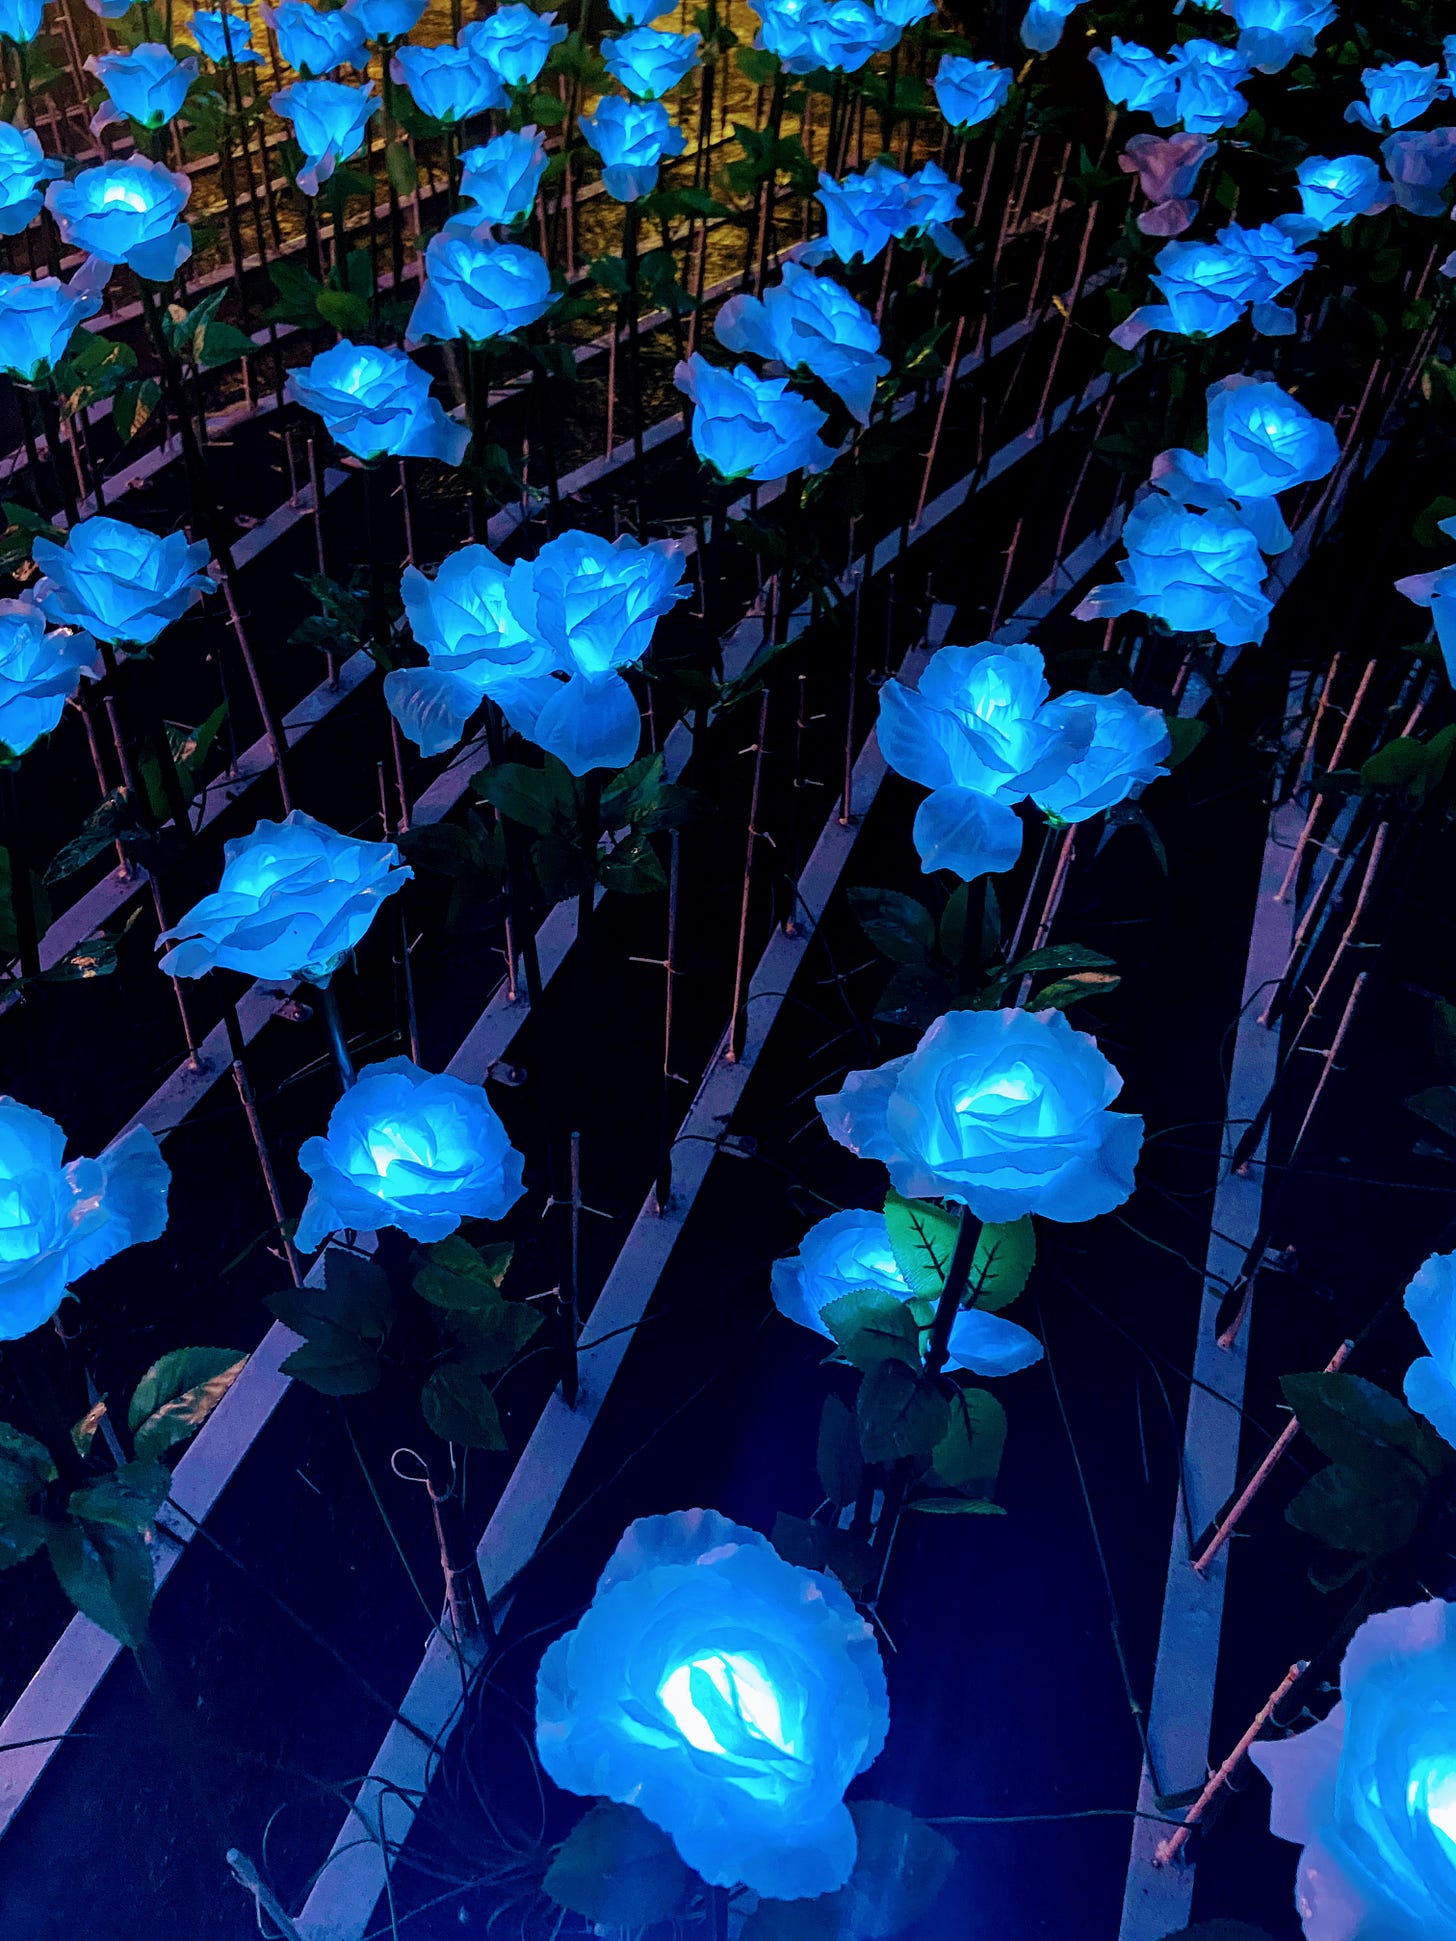 rows of blue rose-shaped lights